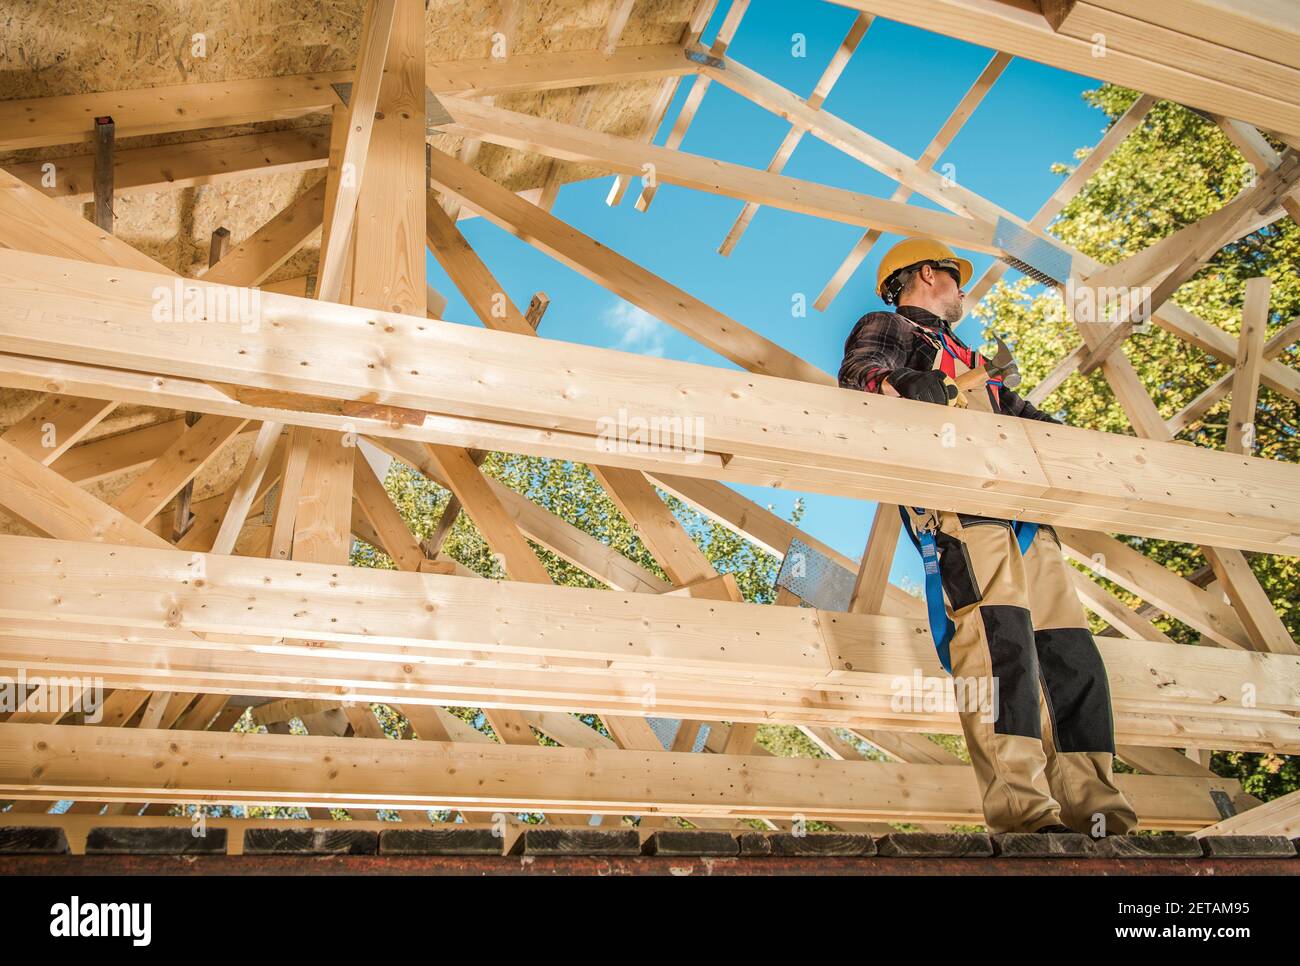 Skeleton Wood Frame Of House Building. Caucasian Contractor Worker on the Attic Frame. Industrial Theme. Stock Photo